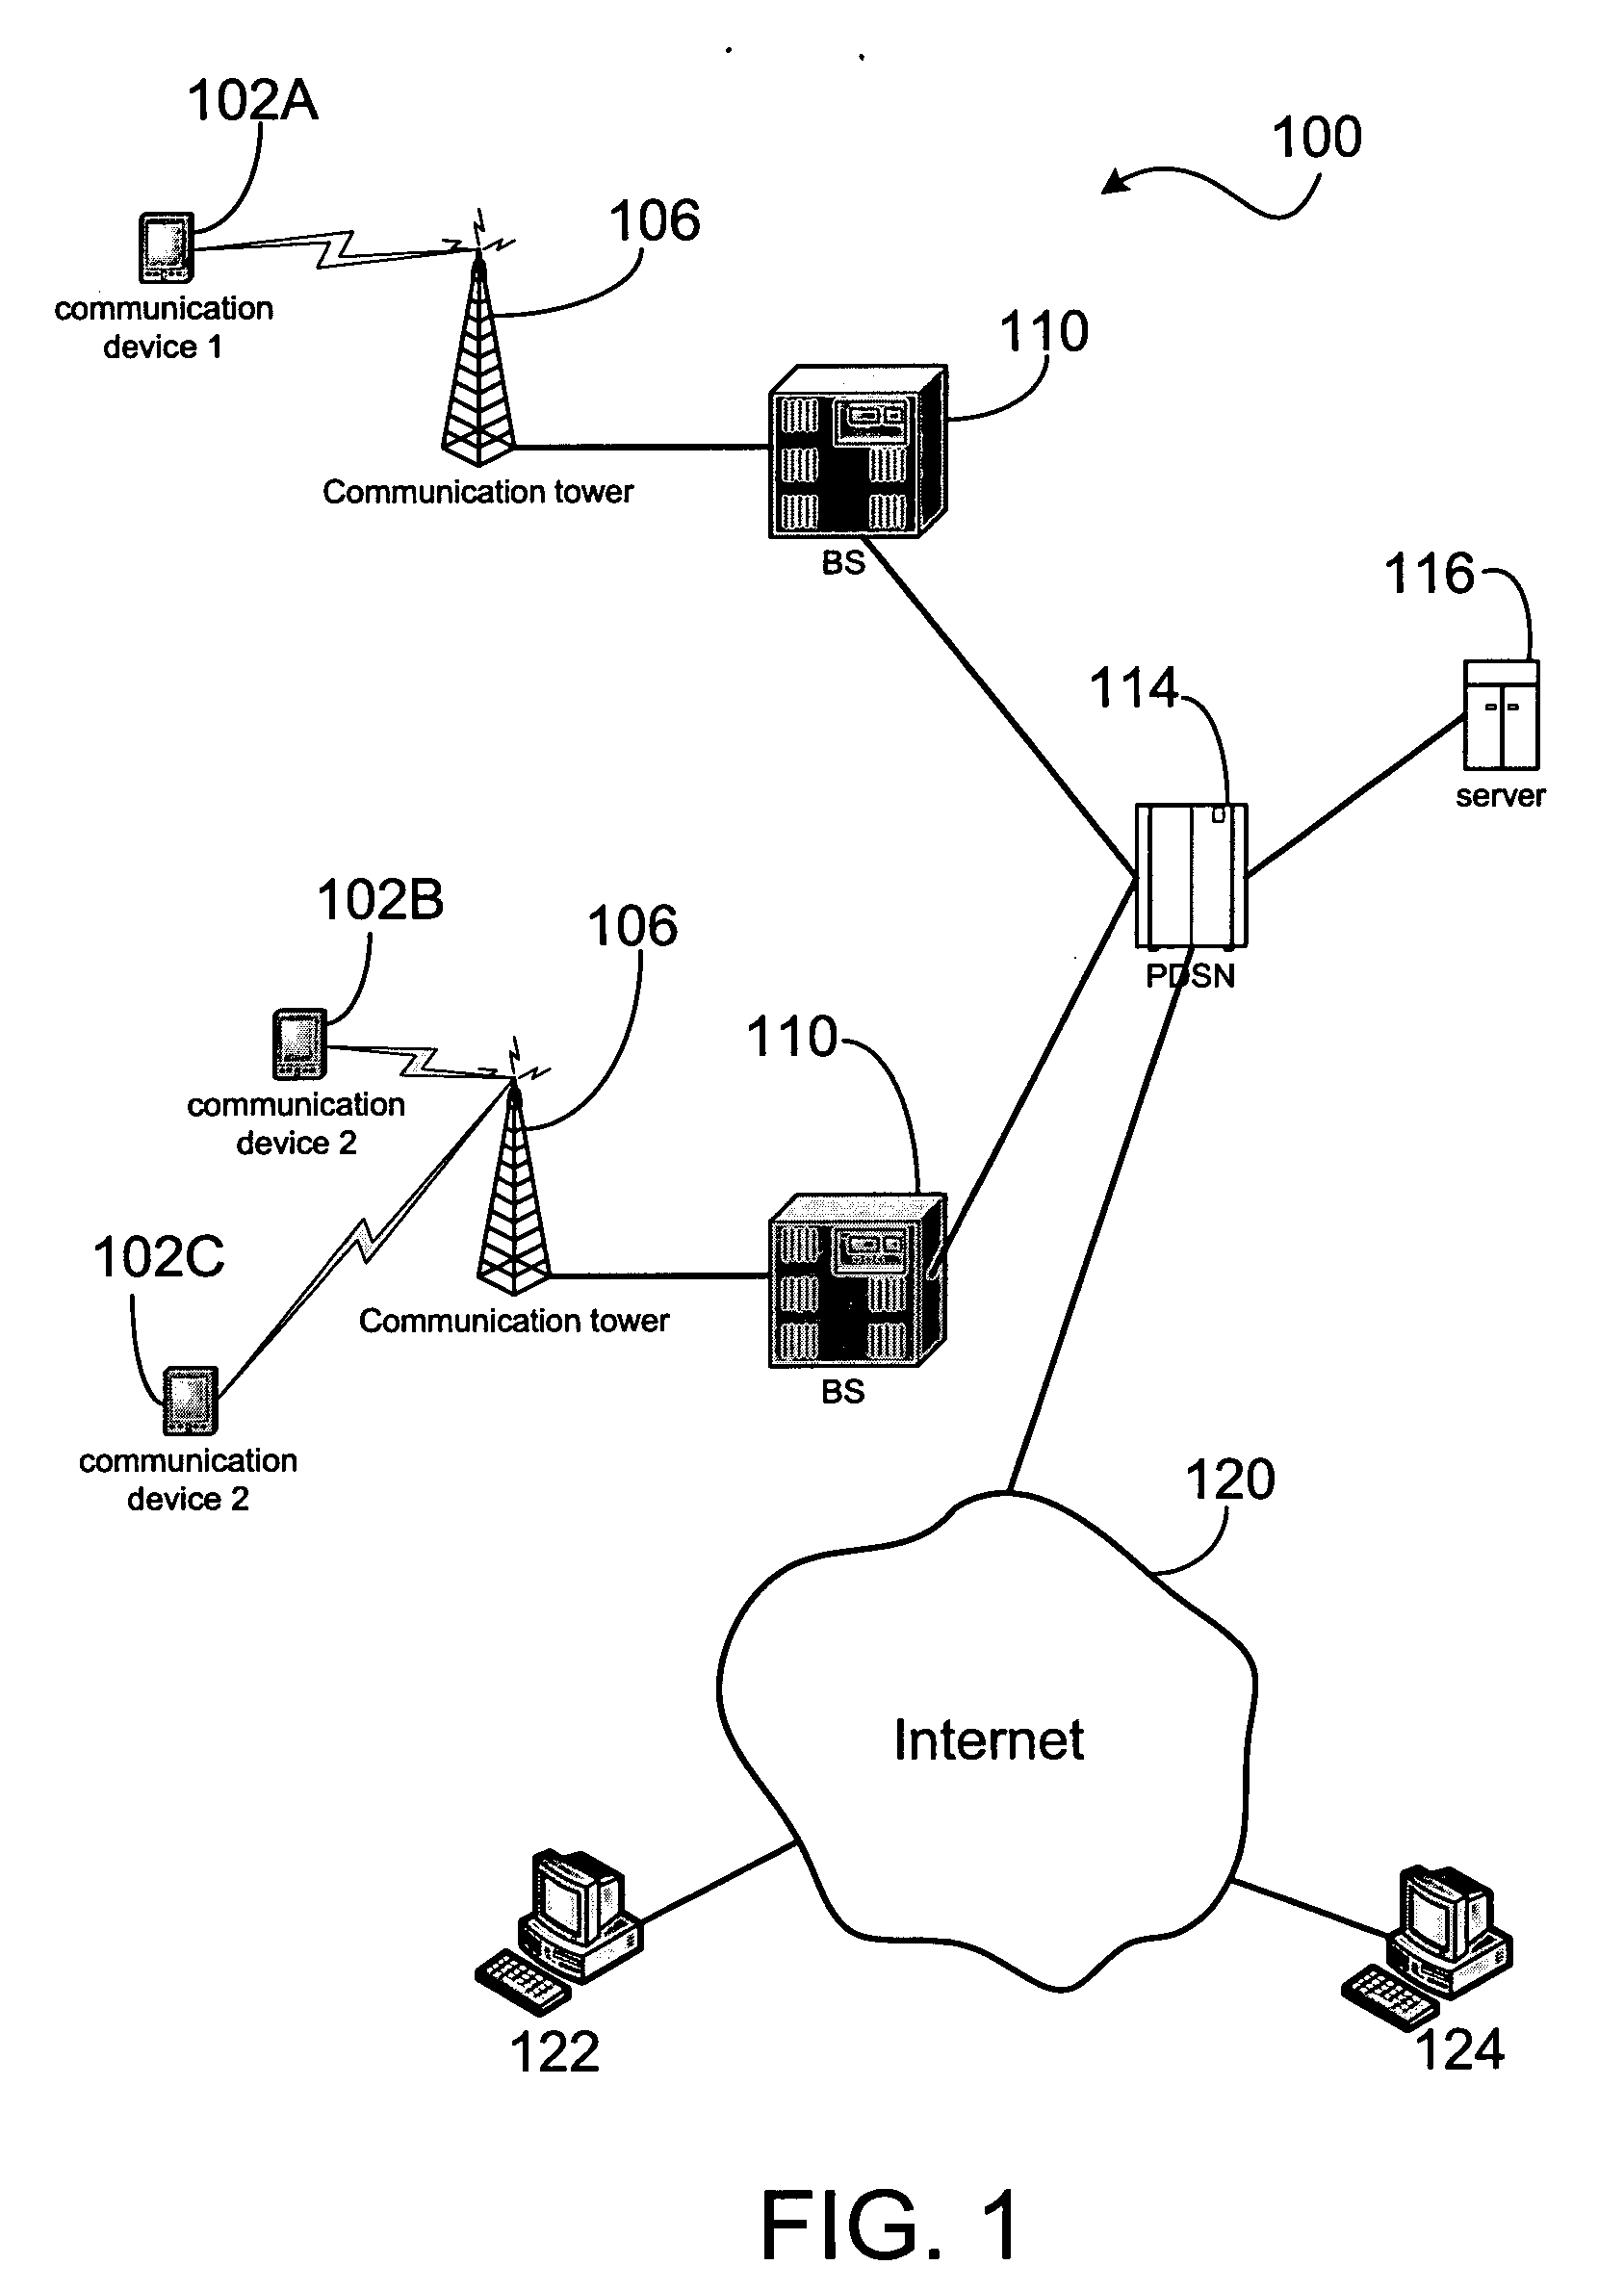 Apparatus and method for resolving request collision in a high bandwidth wireless network